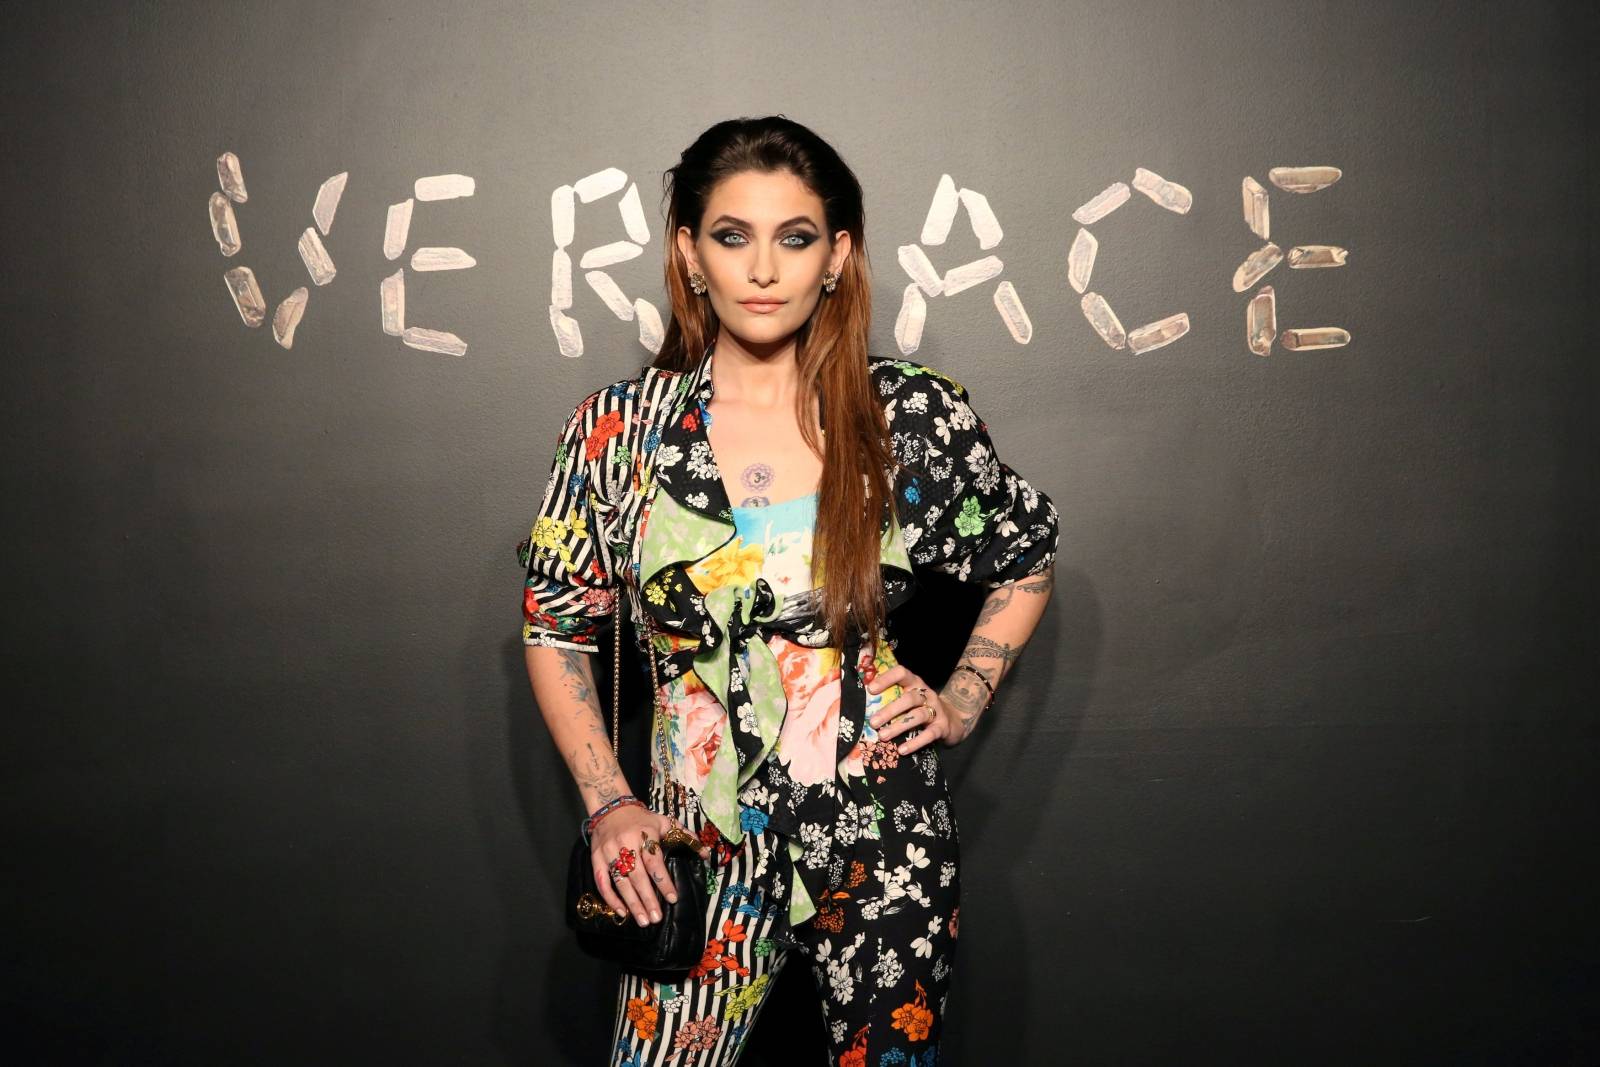 FILE PHOTO: Actress Paris Jackson poses for a photo before attending the Versace presentation in New York